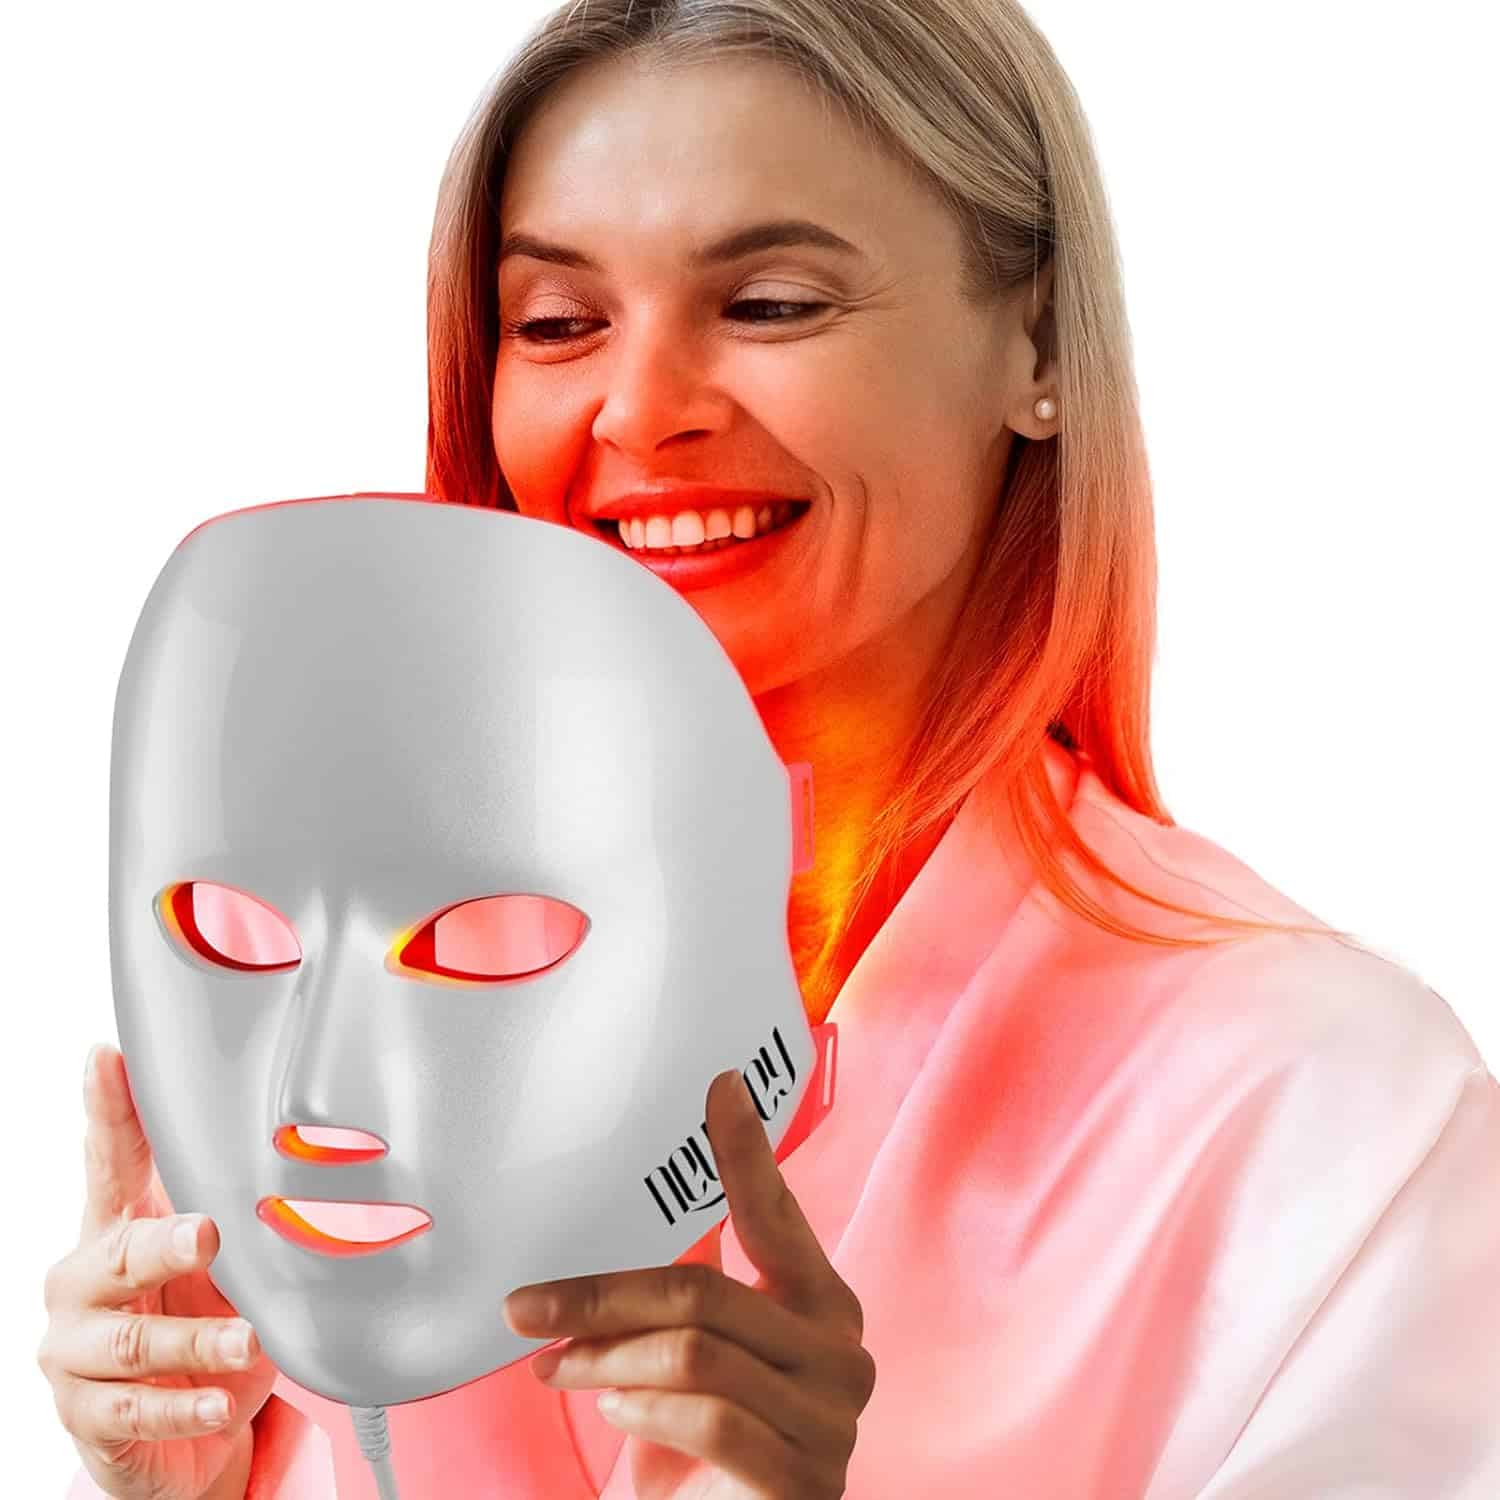 NEWKEY Red Light Therapy Mask for Face,7 Colors LED Face Mask Light Therapy, At-Home Photon Skin Care Beauty Mask for Anti Wrinkles Acne Reduction